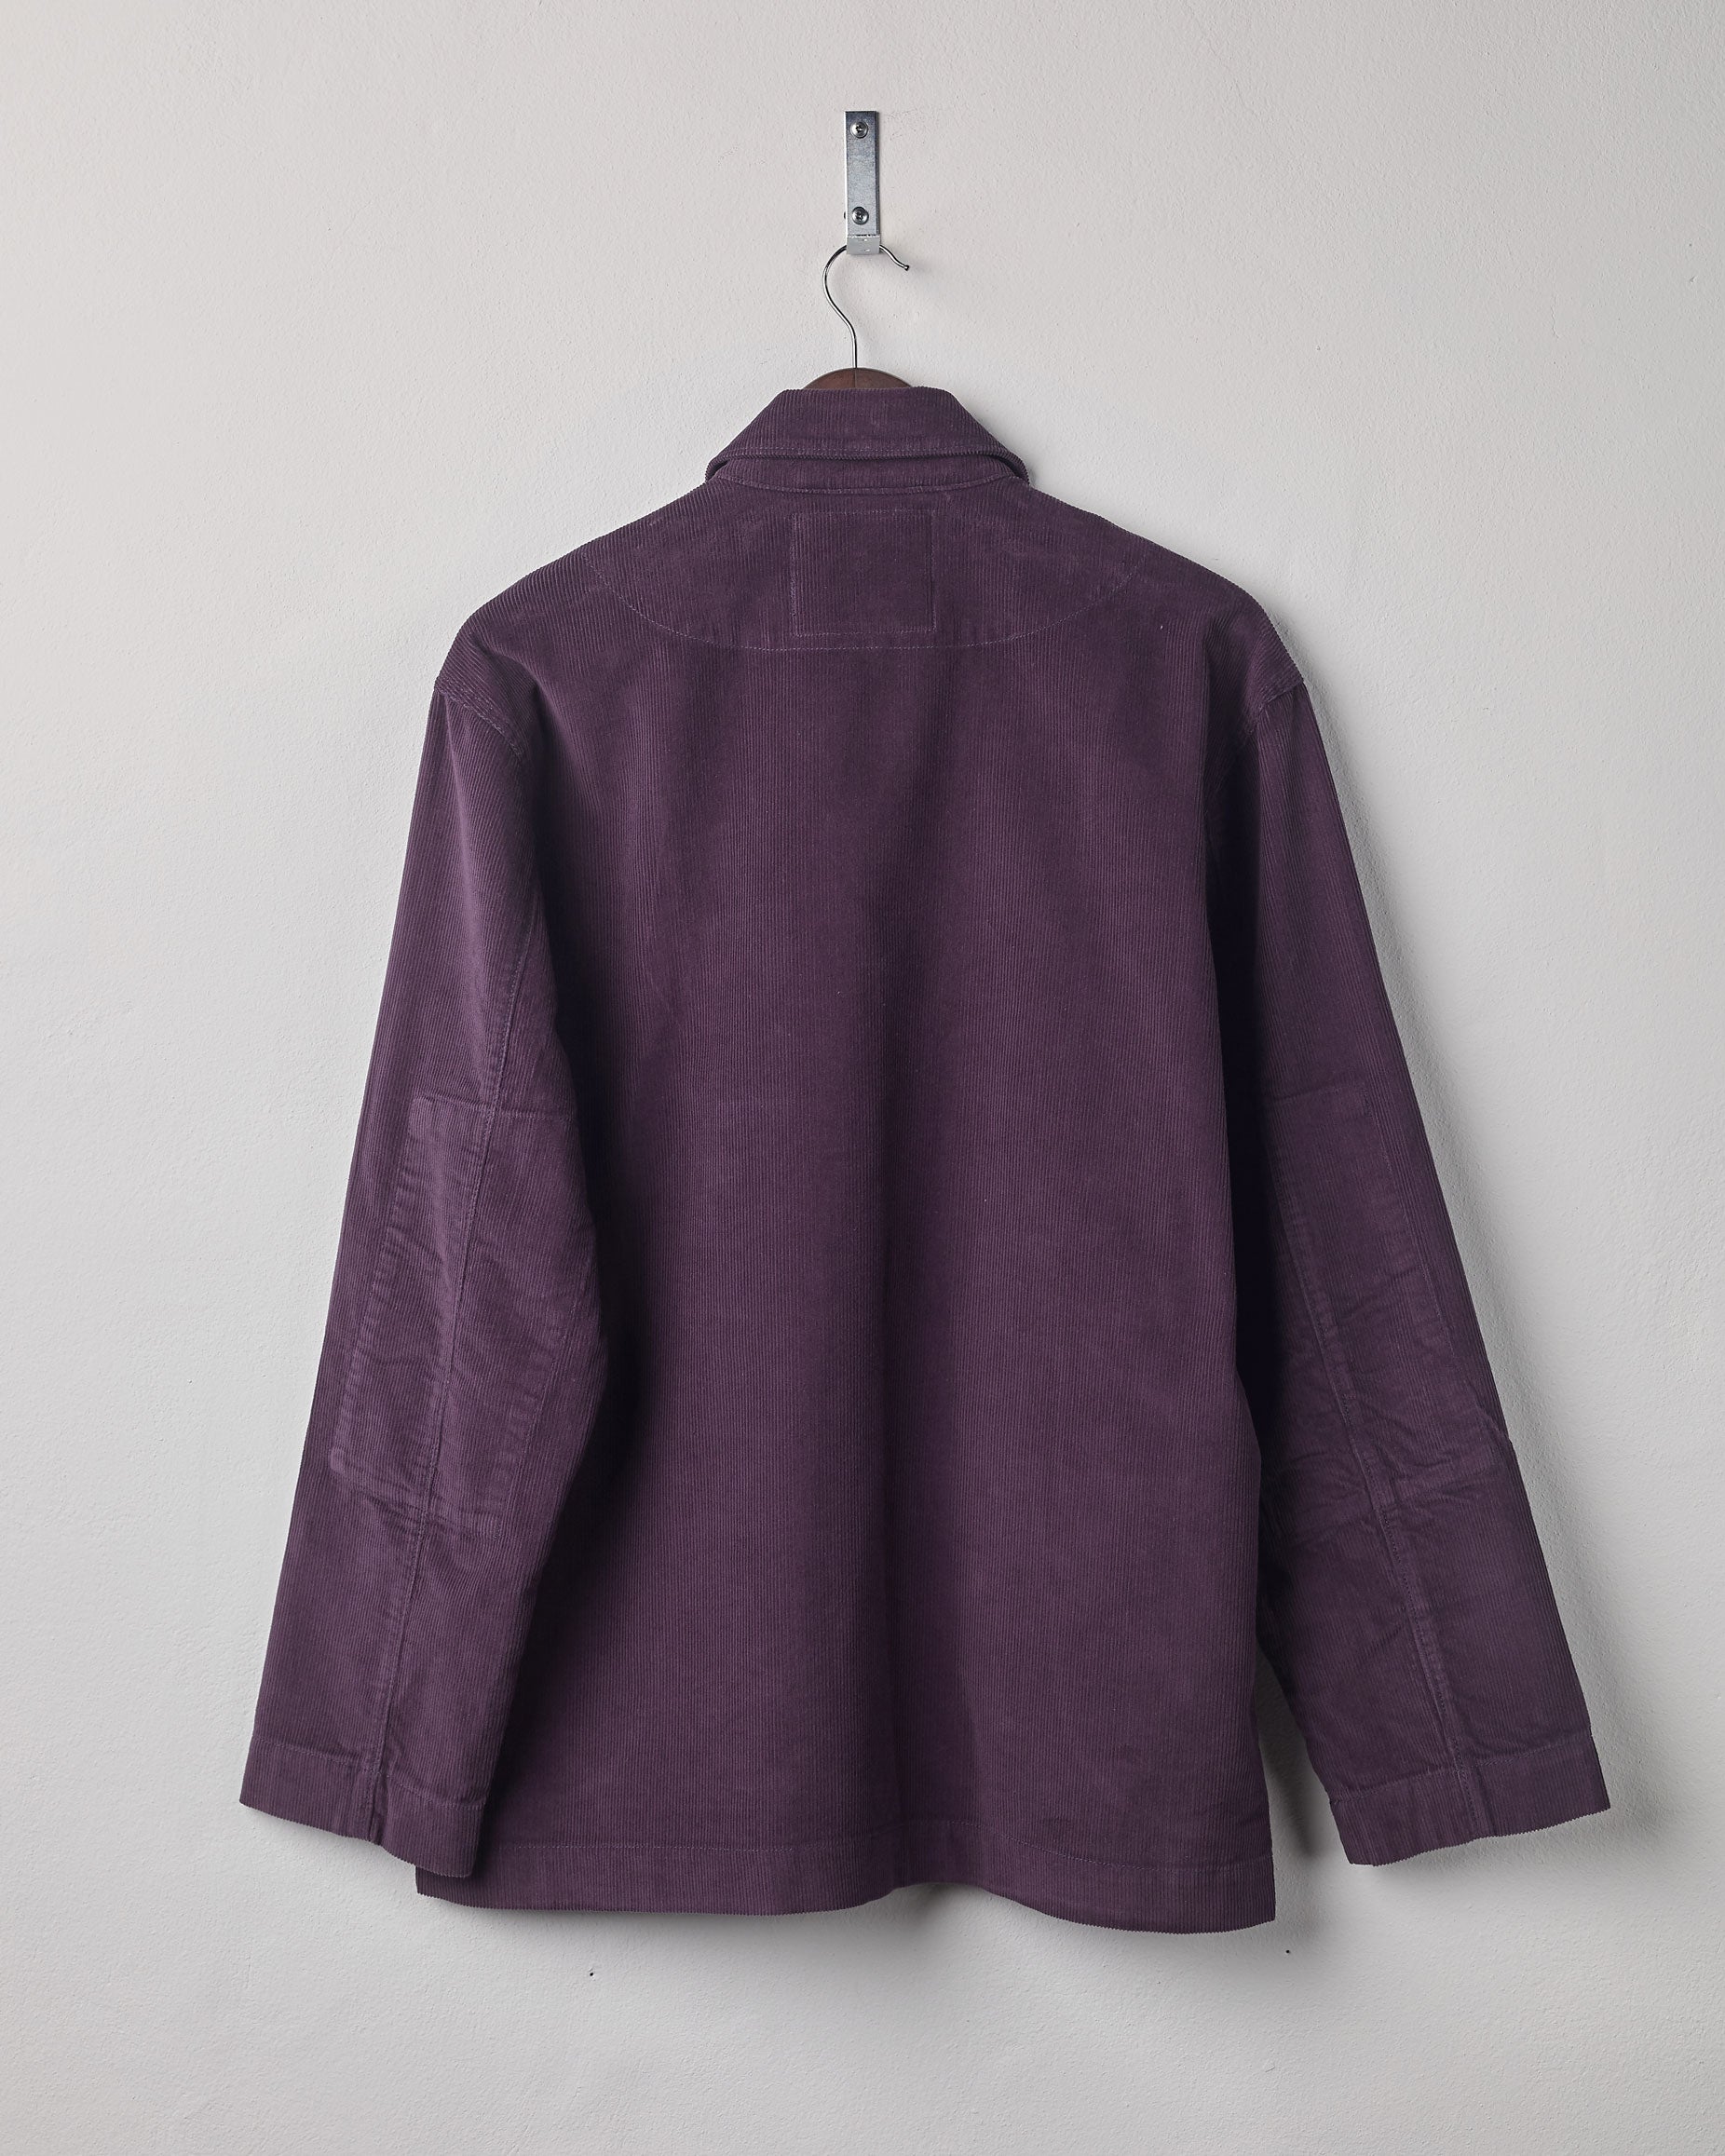 Full-length, rear view of Uskees #3006 blazer in plum corduroy showing reinforced elbows and simple design.